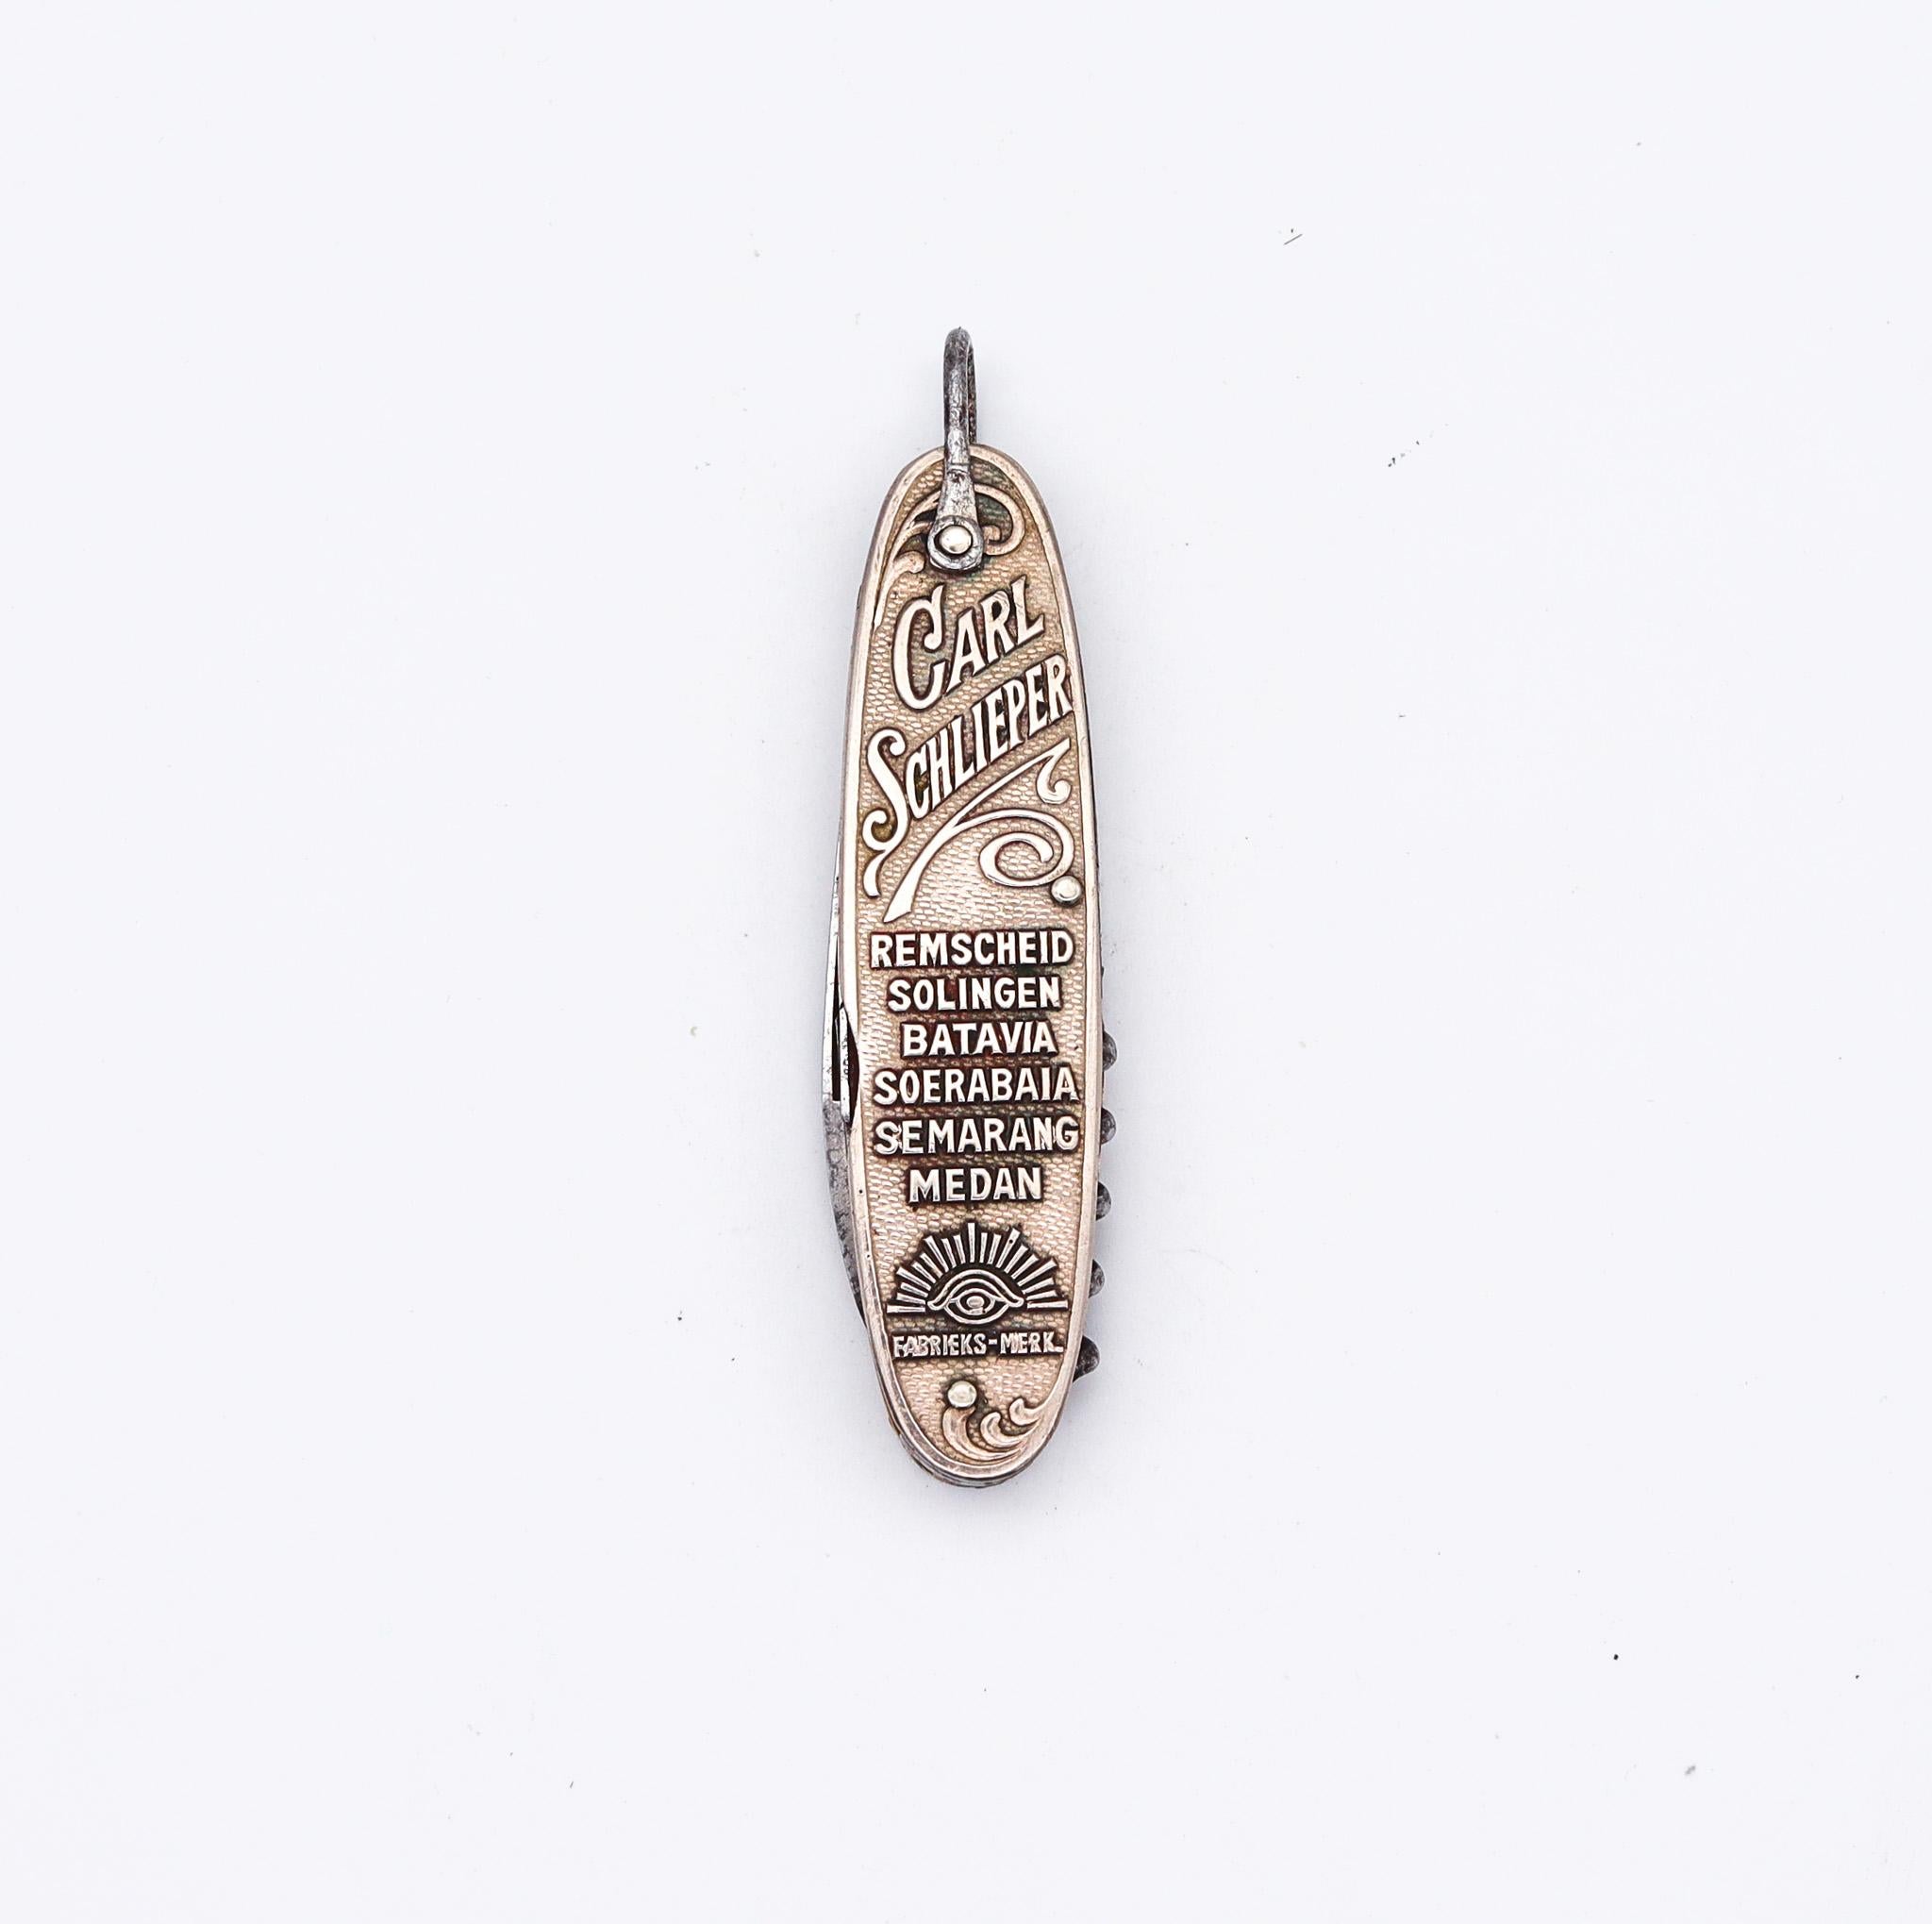 A pocket knife designed by Carl Schlieper.

Beautiful antique pocket knife, created in Germany by the Carl Schlieper Co, back in the 1930. This pocket knife is very unusual, crafted with art deco industrial motif in solid Solingen steel and silver